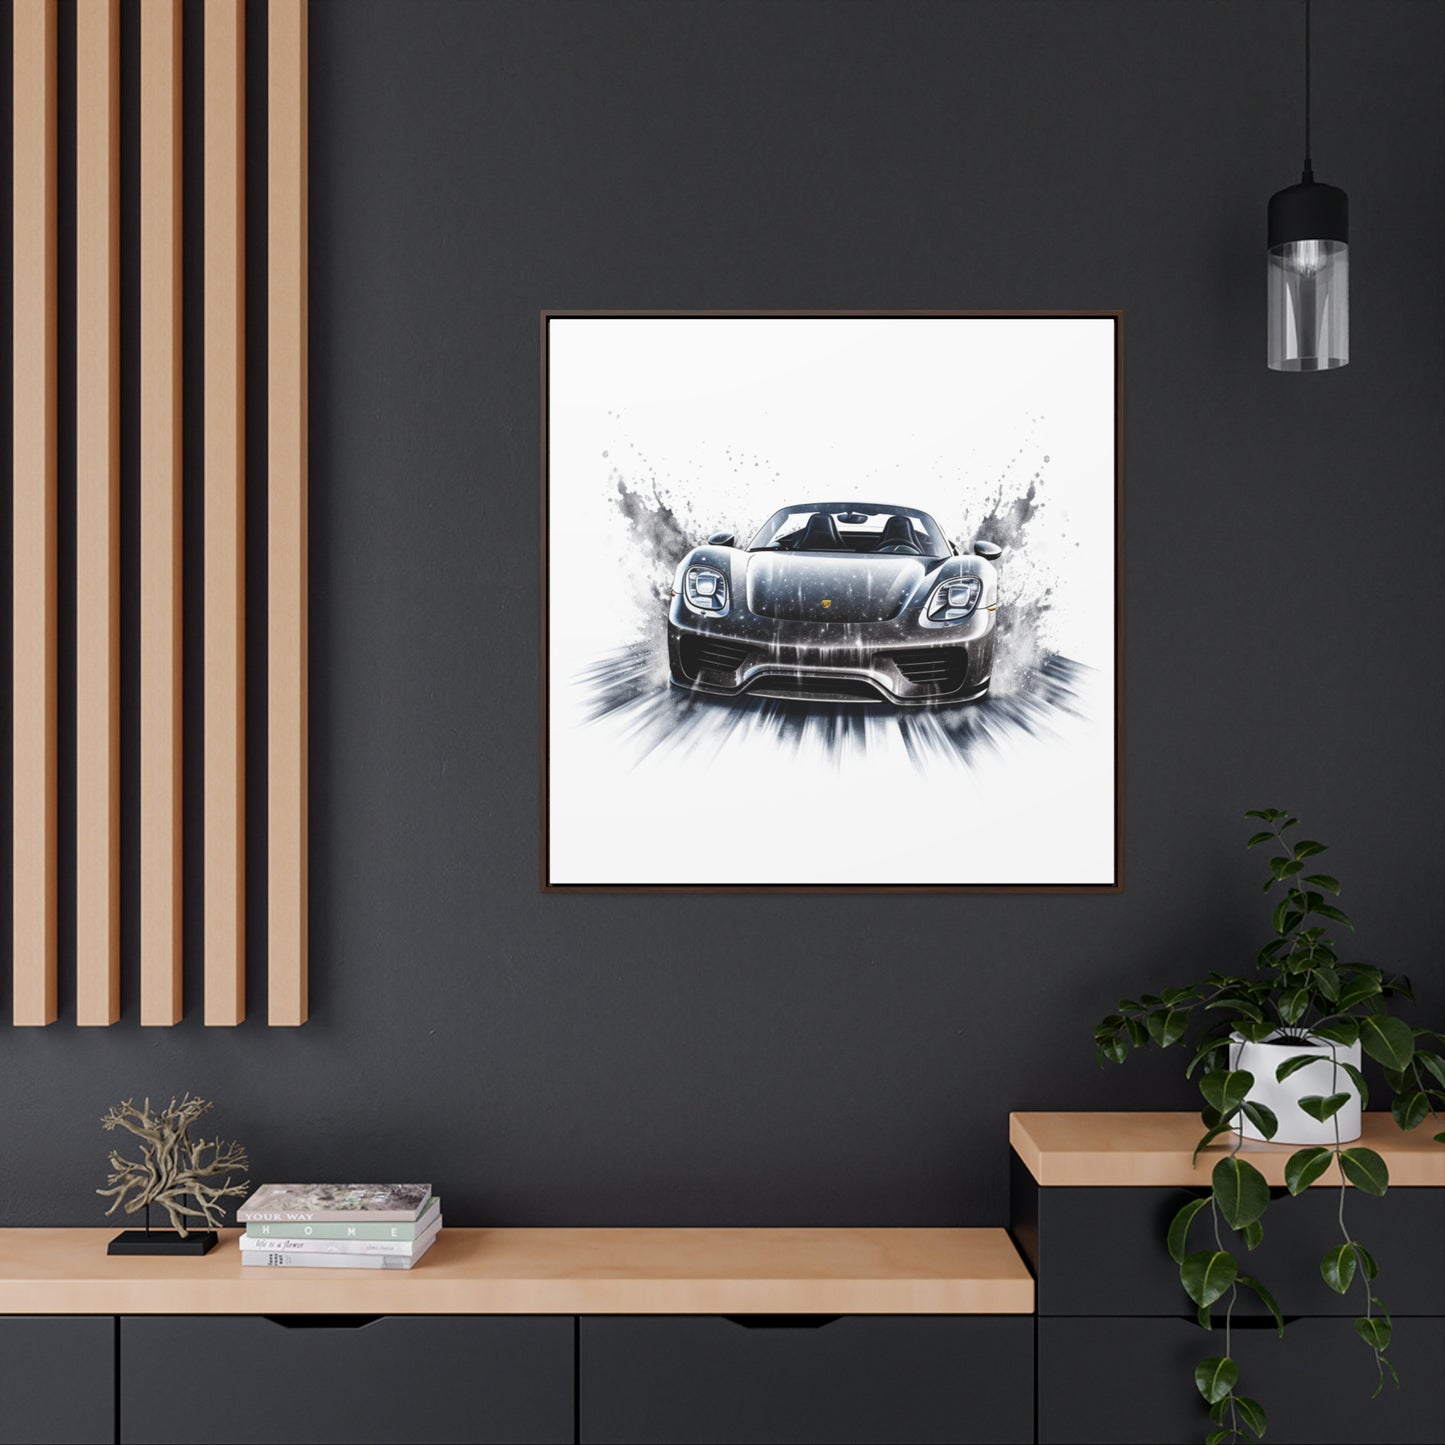 Gallery Canvas Wraps, Square Frame 918 Spyder white background driving fast with water splashing 3